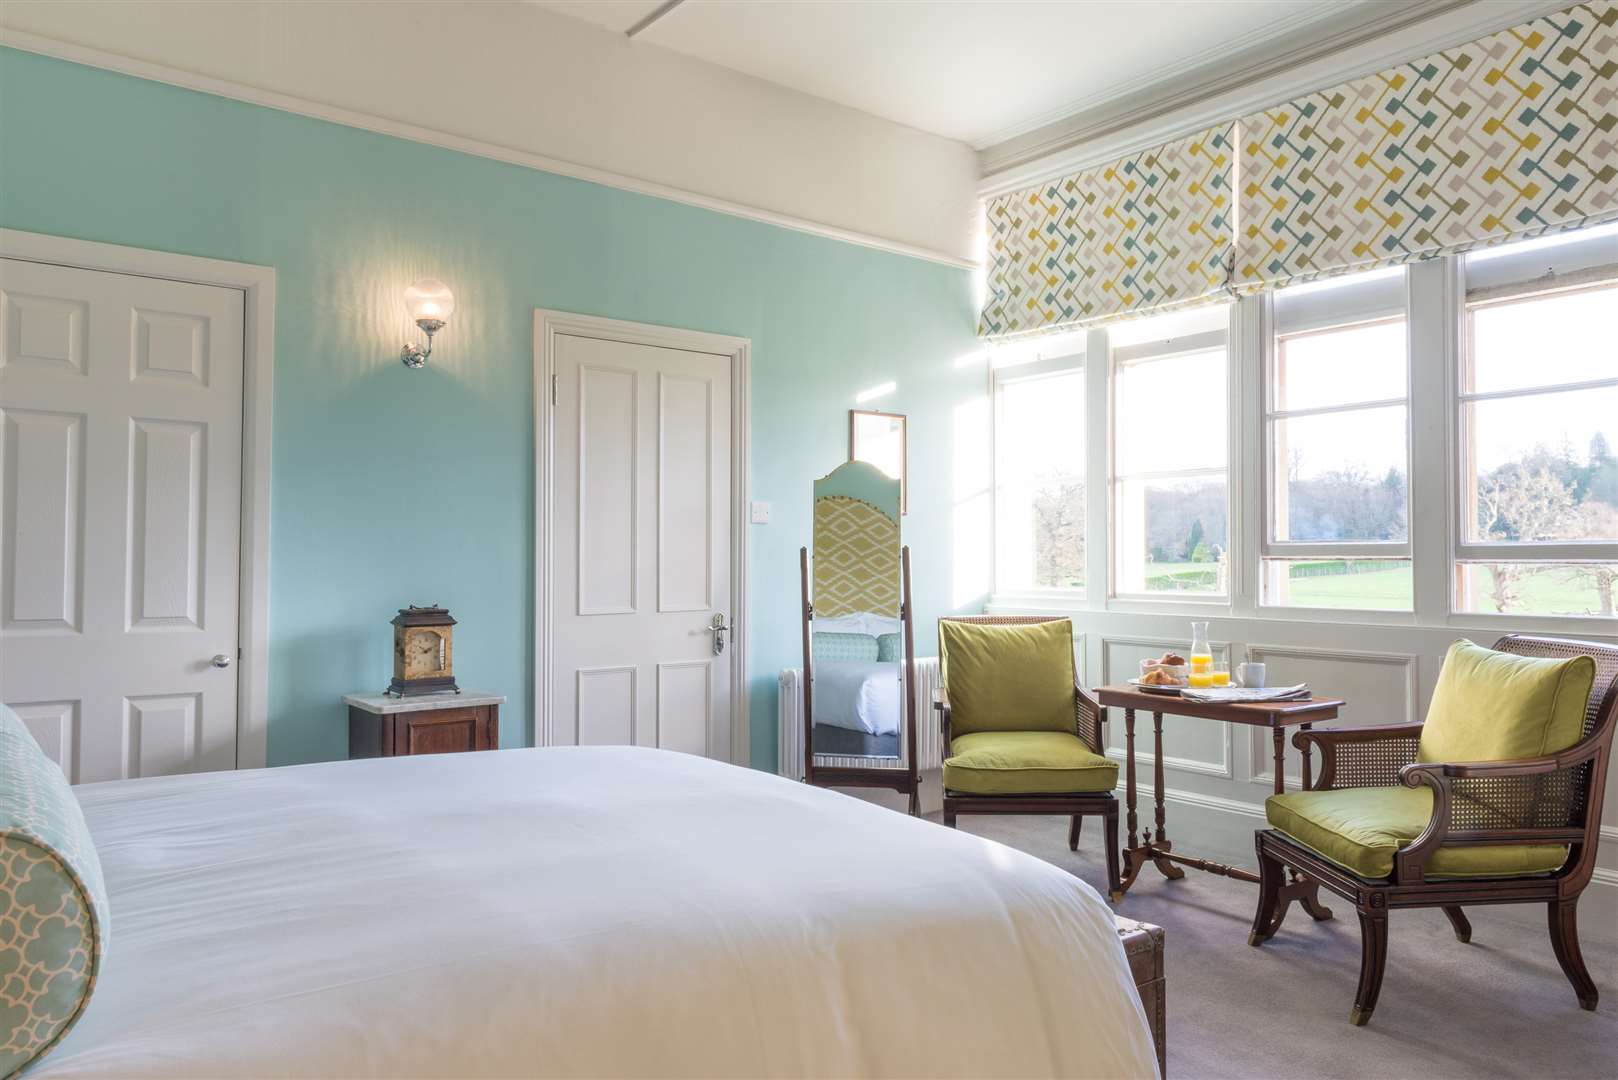 The light and airy bedrooms are equipped with boutique styled furniture and excellent views of the countryside. Picture: Polymedia